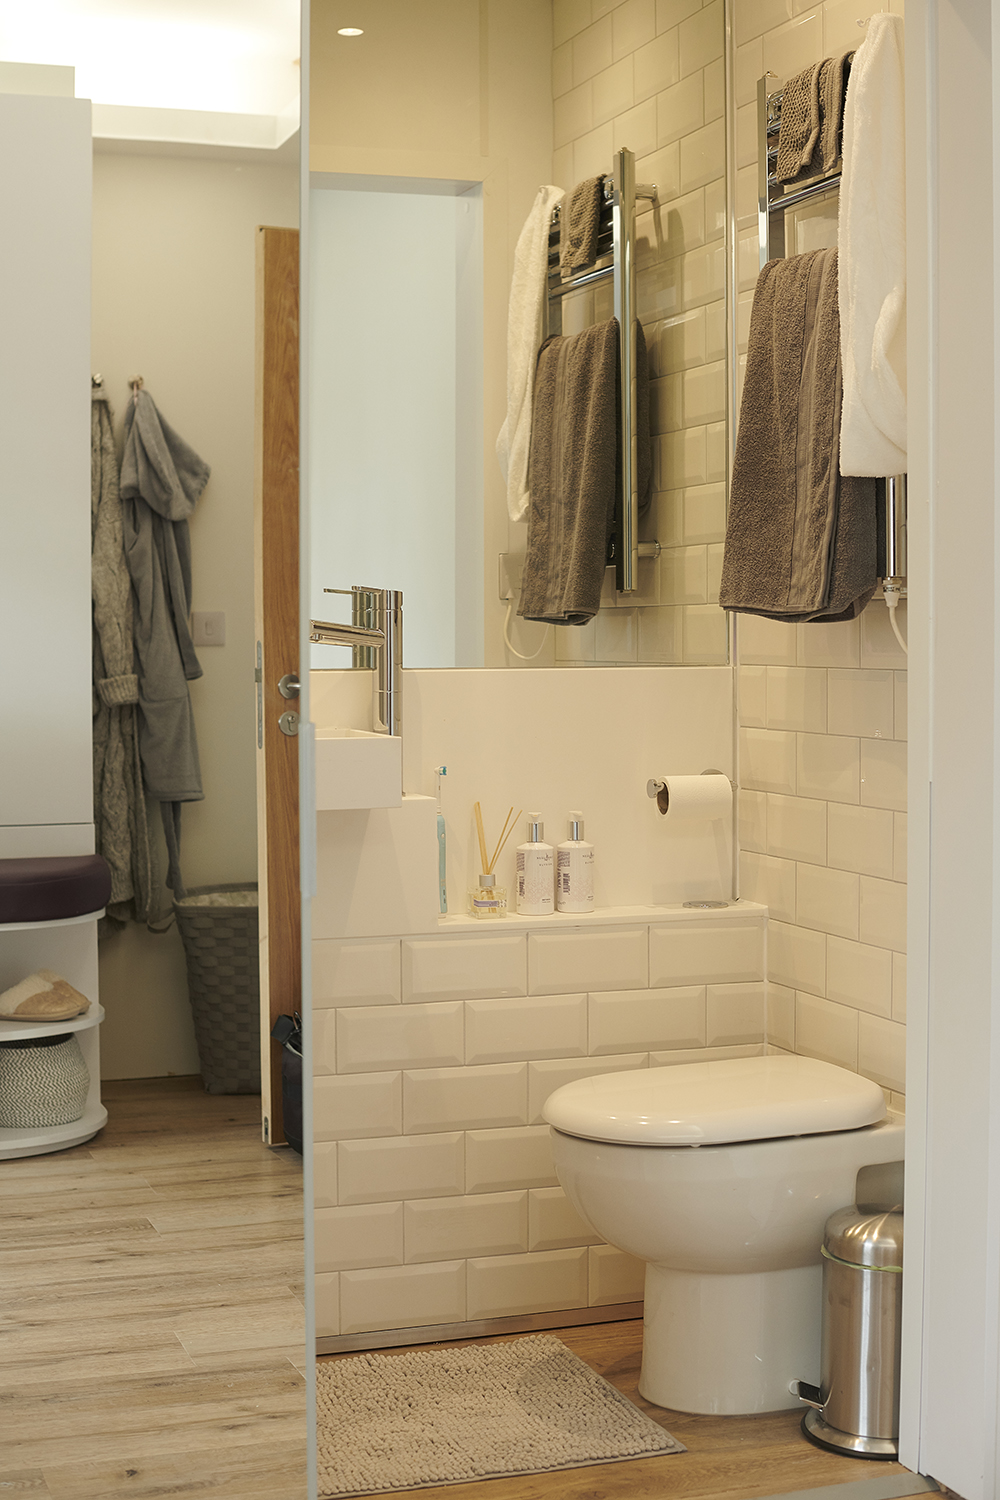 The toilet and towel rail in an en-suite bathroom in a room in the eastern wing of Main Halls.